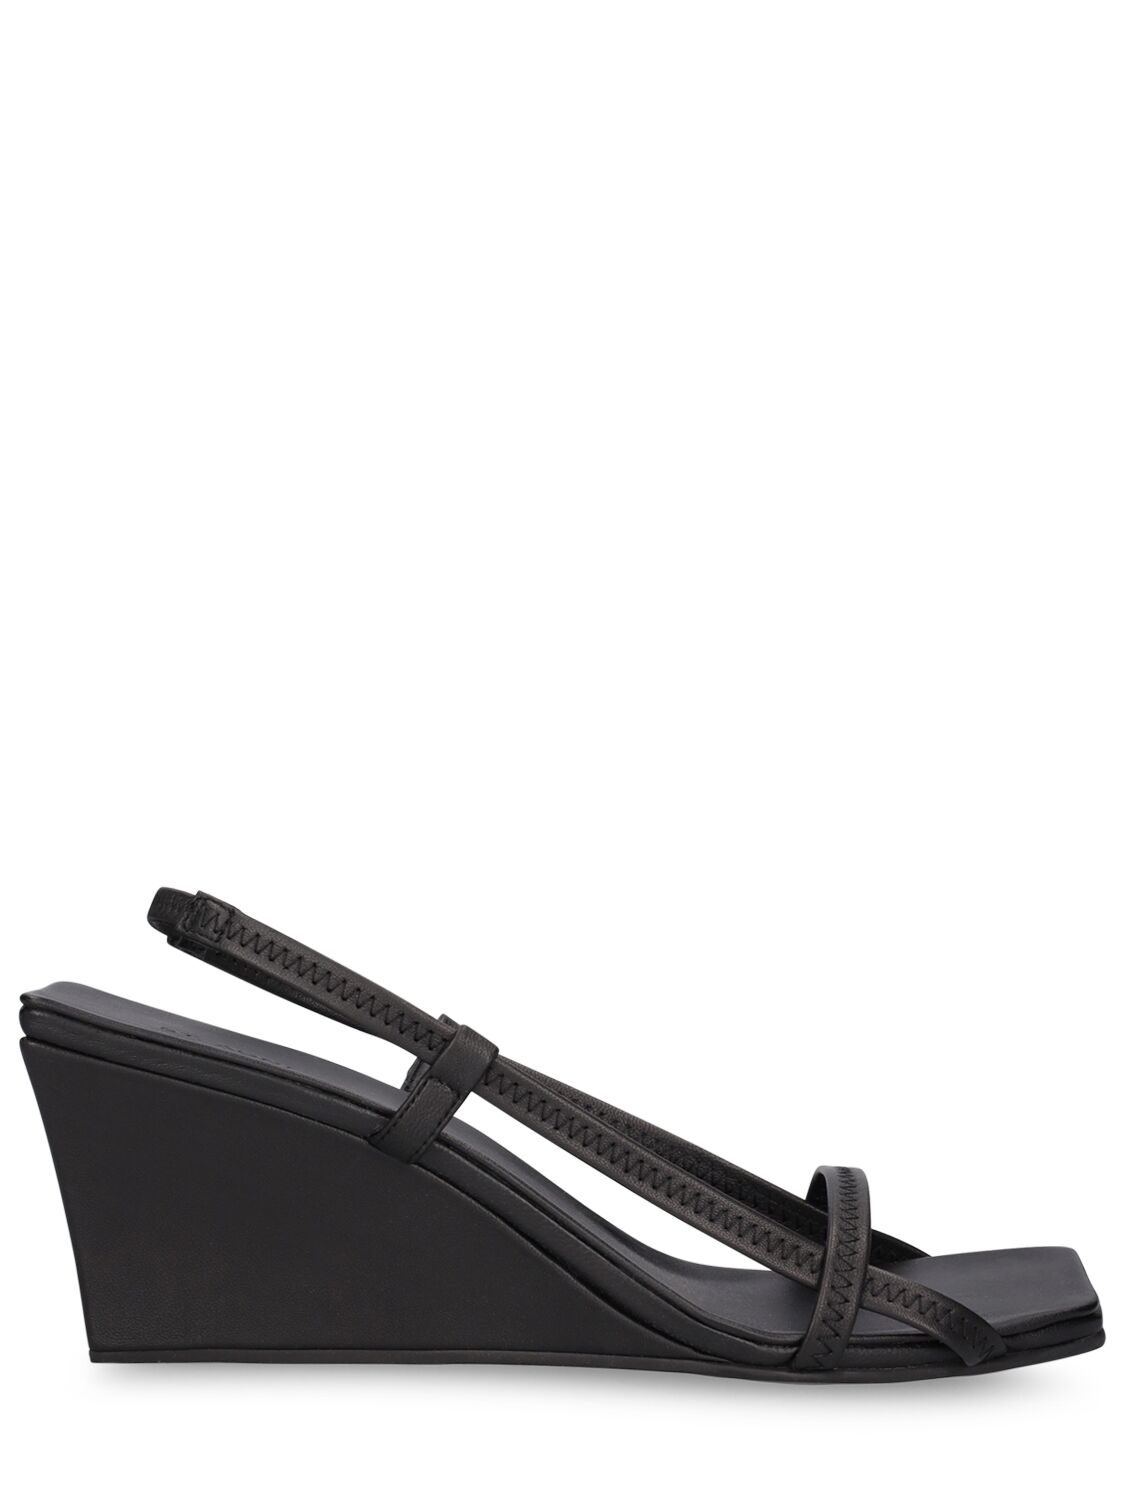 St.agni 75mm Fine Strap Leather Wedges In Black